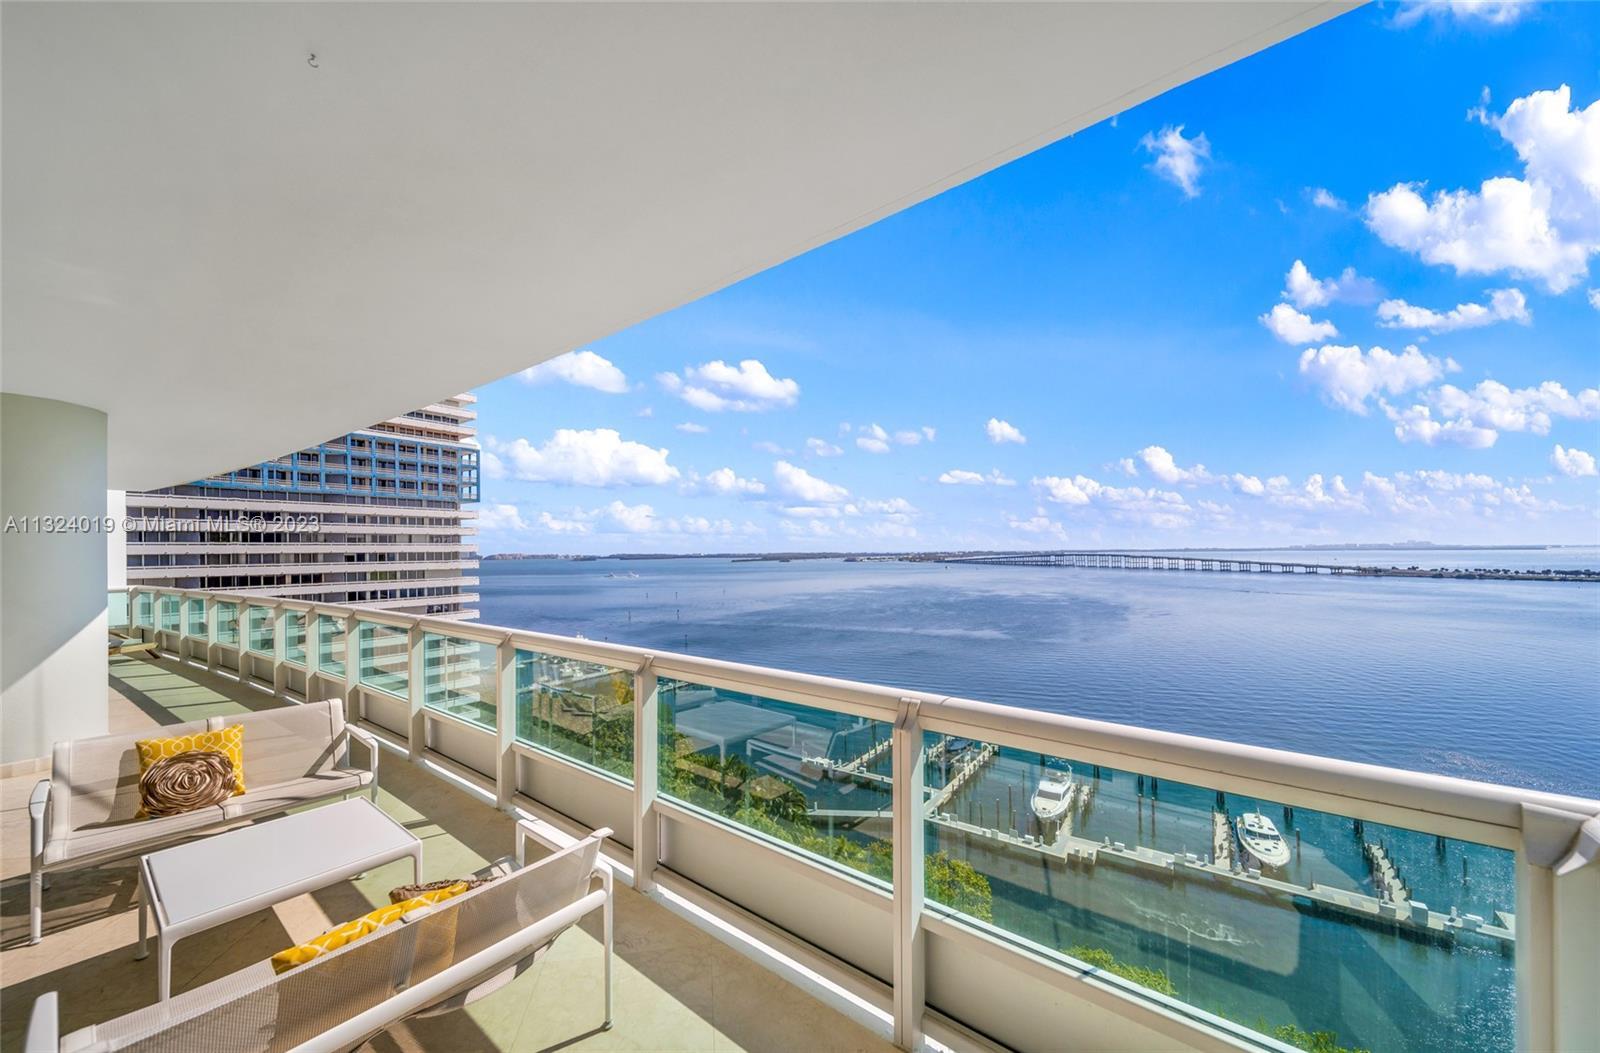 Amazing water views from this 16th floor unit. All rooms face the ample terrace.
2 Bedroom, 2 full 